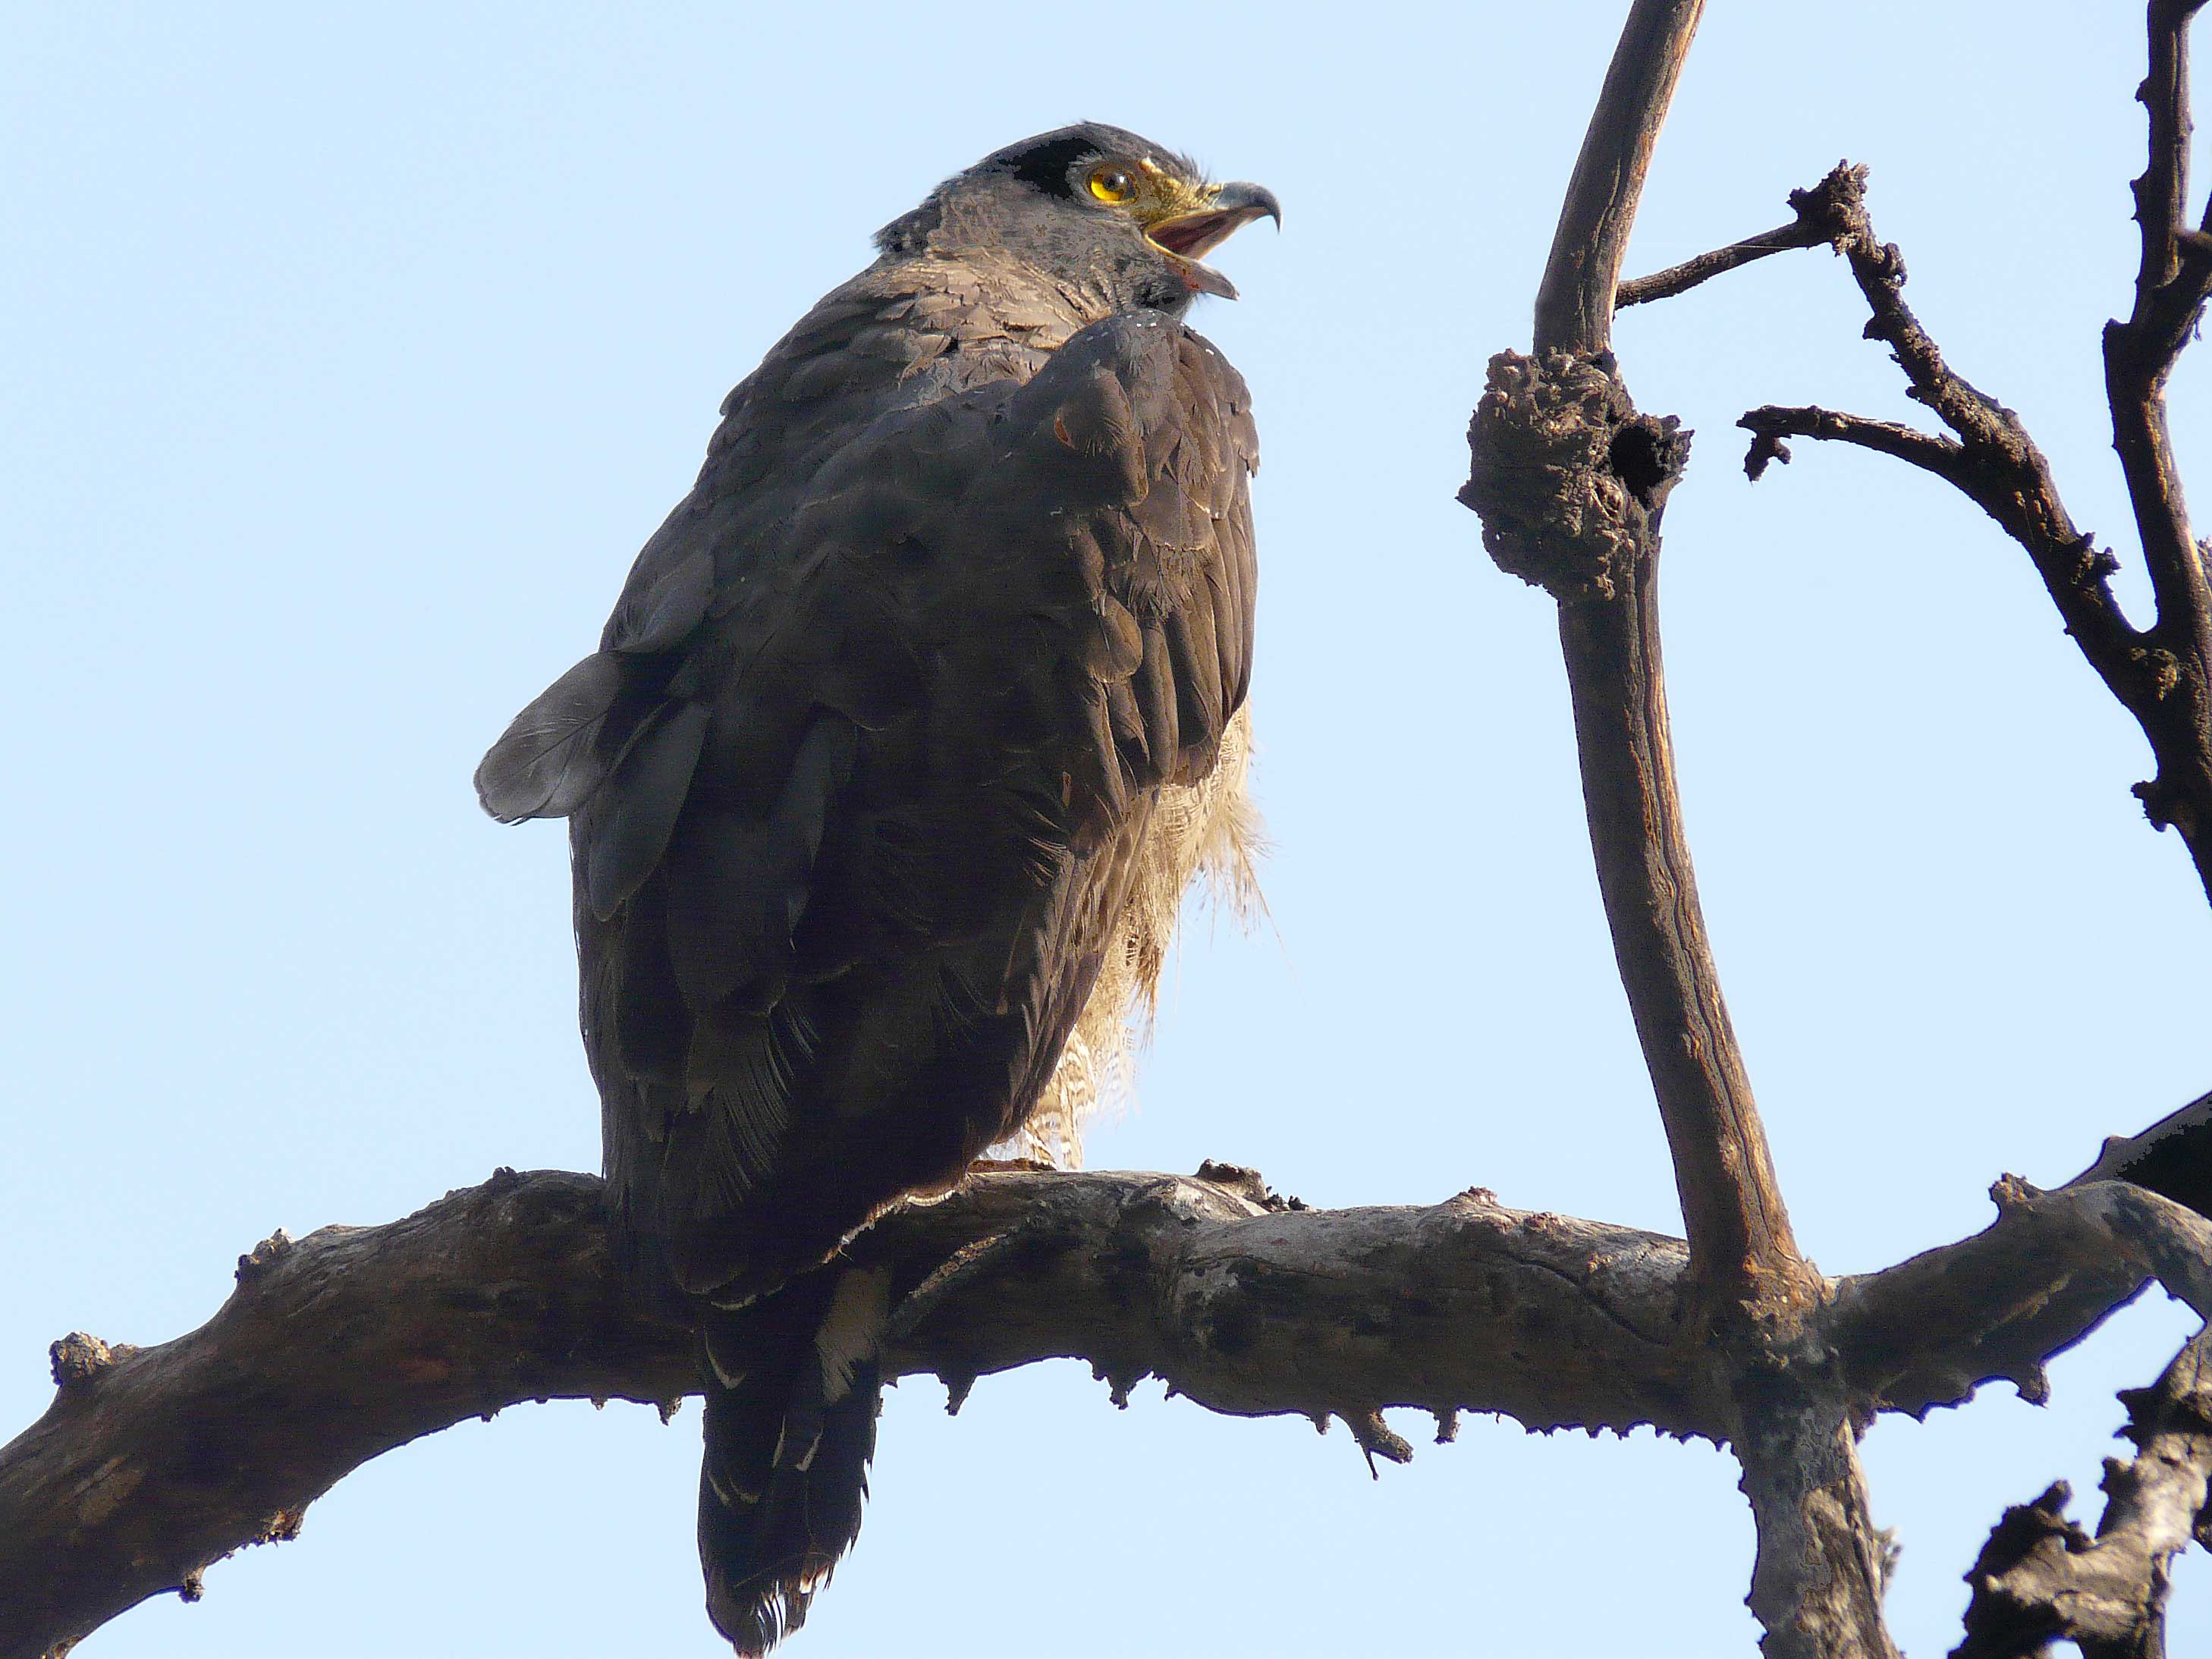 Crested-Serpent-Eagle. Photo © 2010 by Blake Maybank.